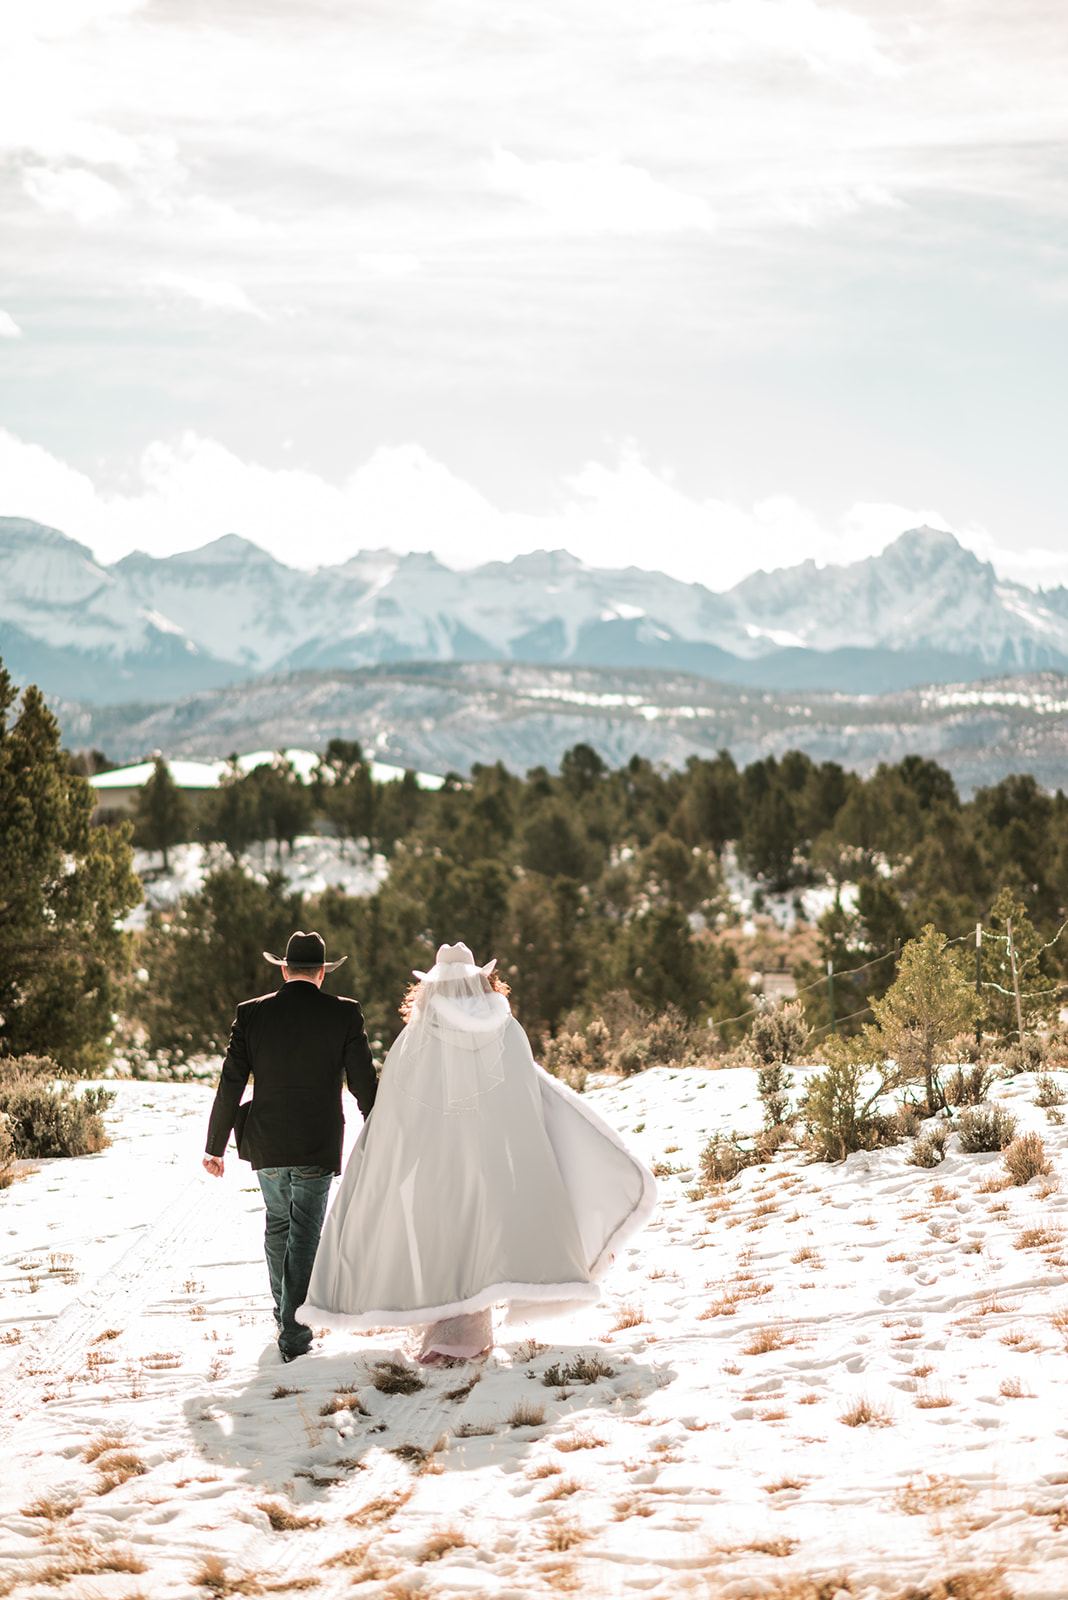 Day after wedding adventure session in the winter in Ridgway Colorado, with views of Mt. Sneffels